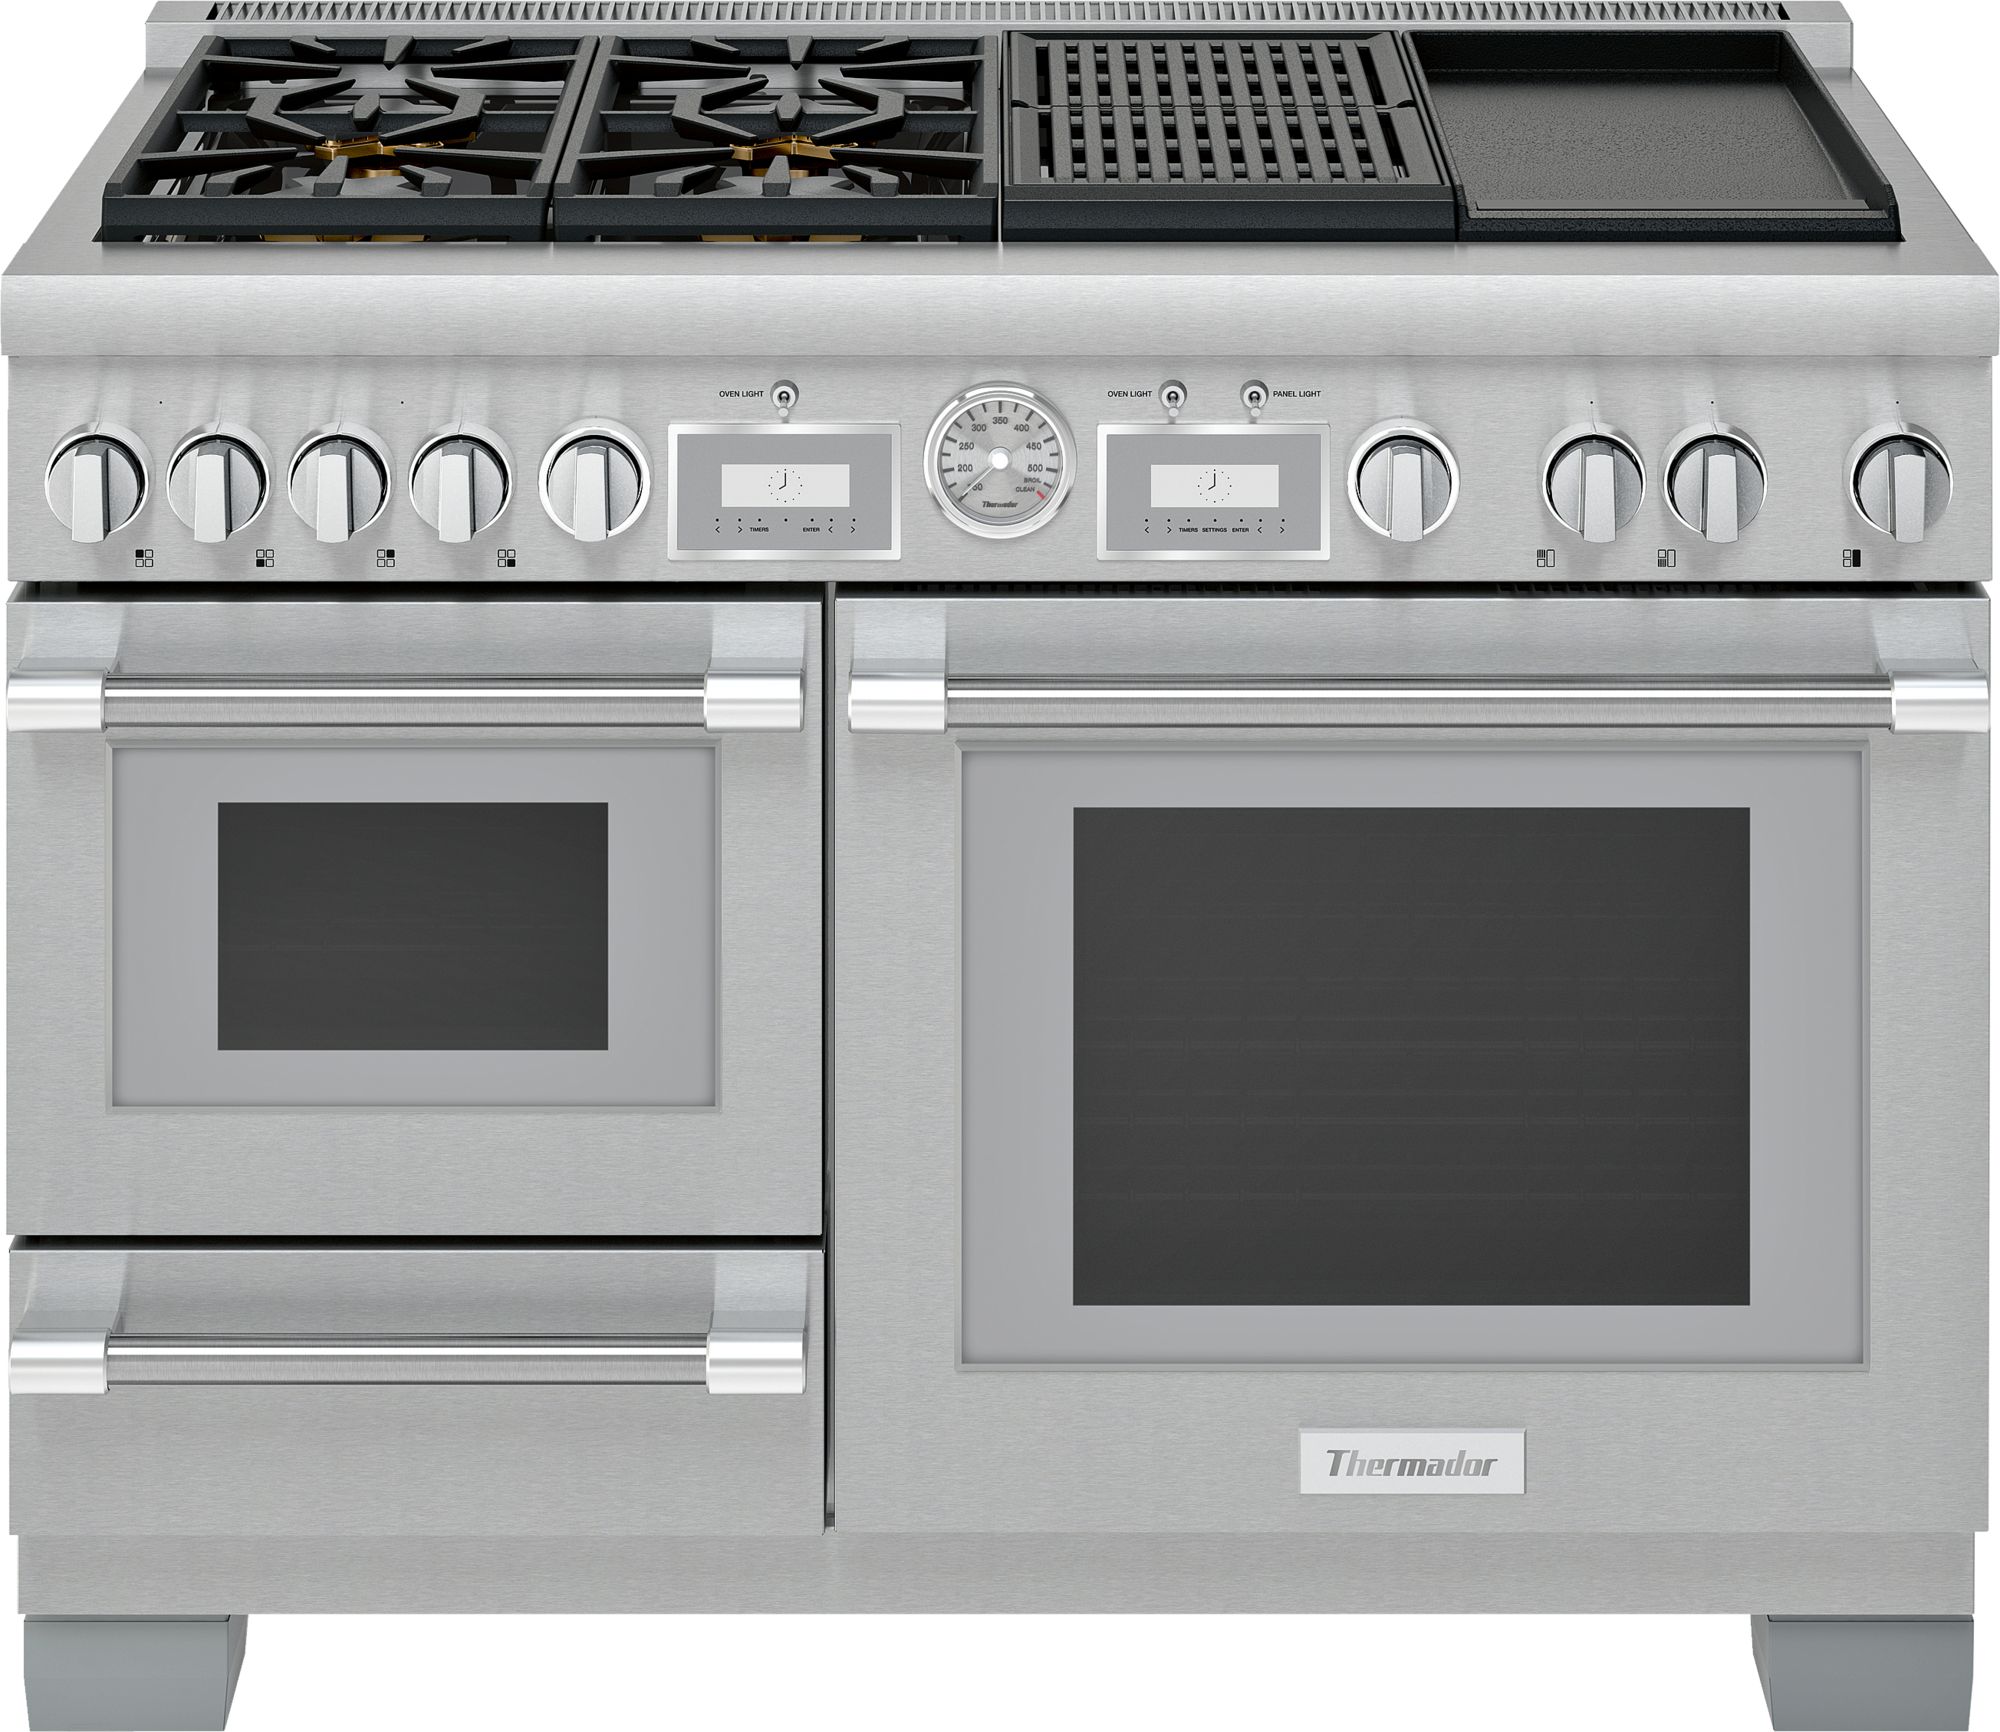 Stock photo of a stainless steel Thermador brand range with two ovens and a warming drawer. 